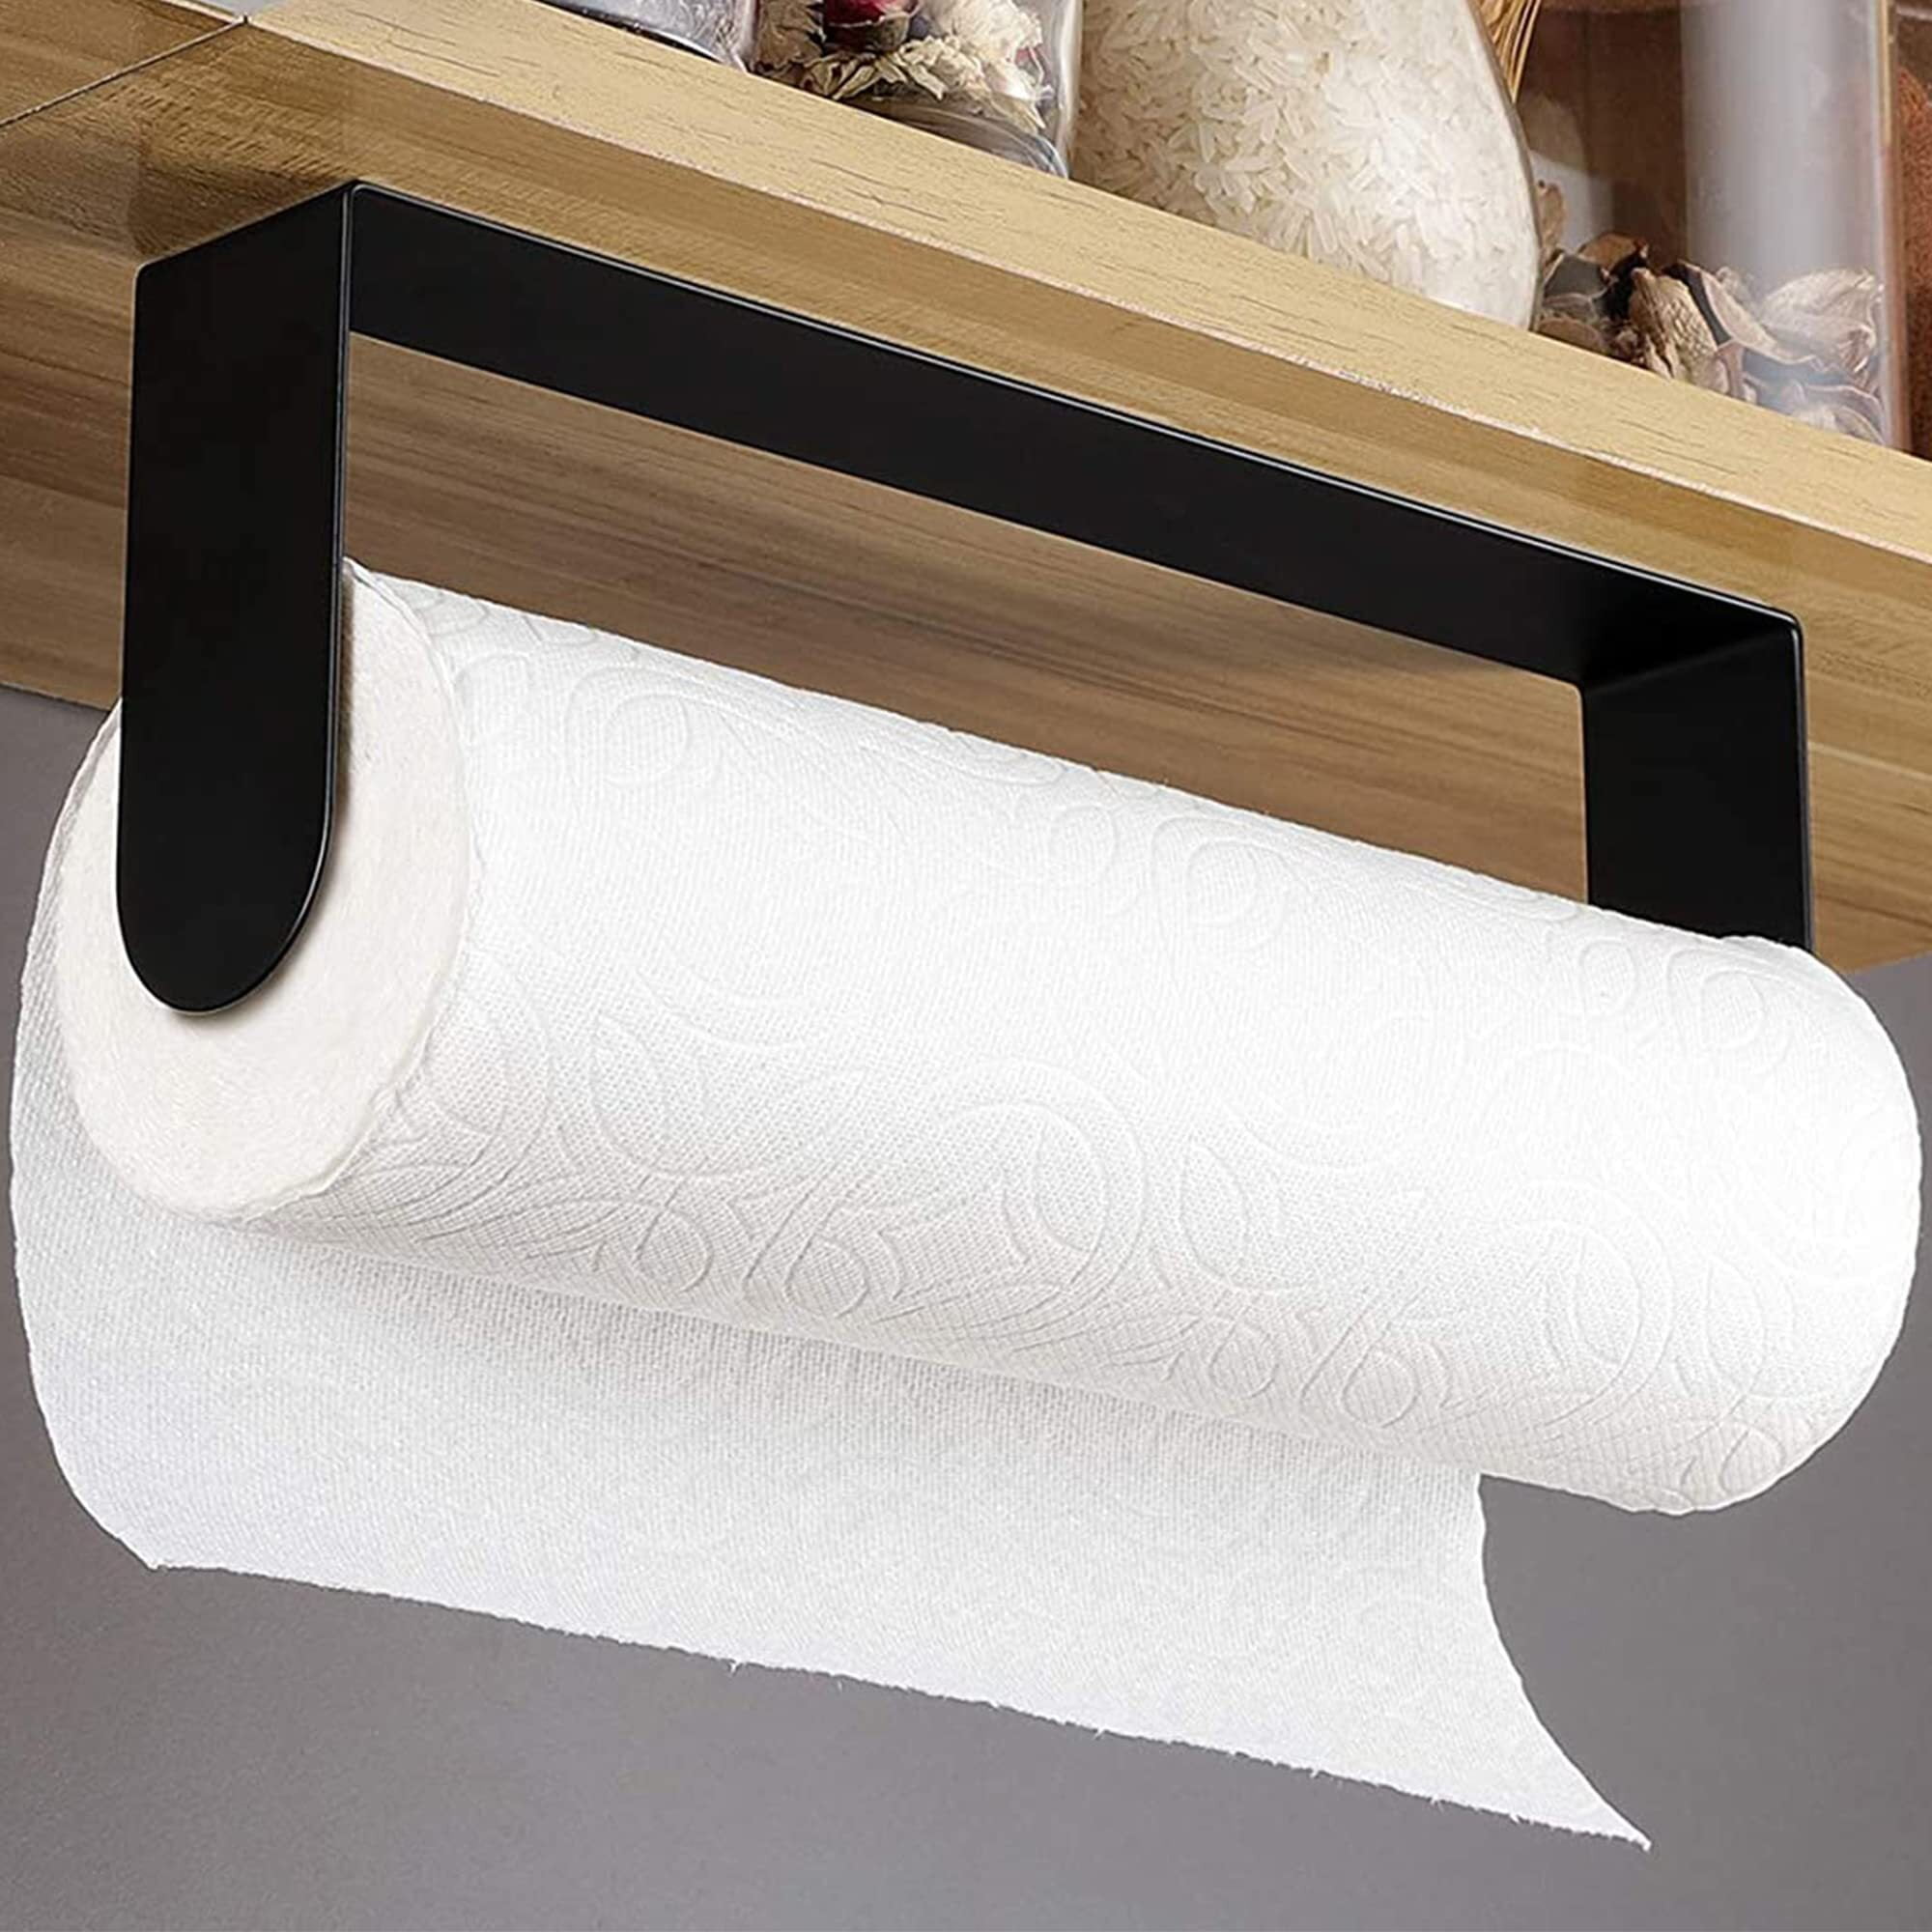 Joom Self-Adhesive Paper Towel Holder Under Cabinet Towel Holder/Hand Towel Bar-Self-Adhesive Hanging on The Wall,Toilet Tissue Roll Paper Holder